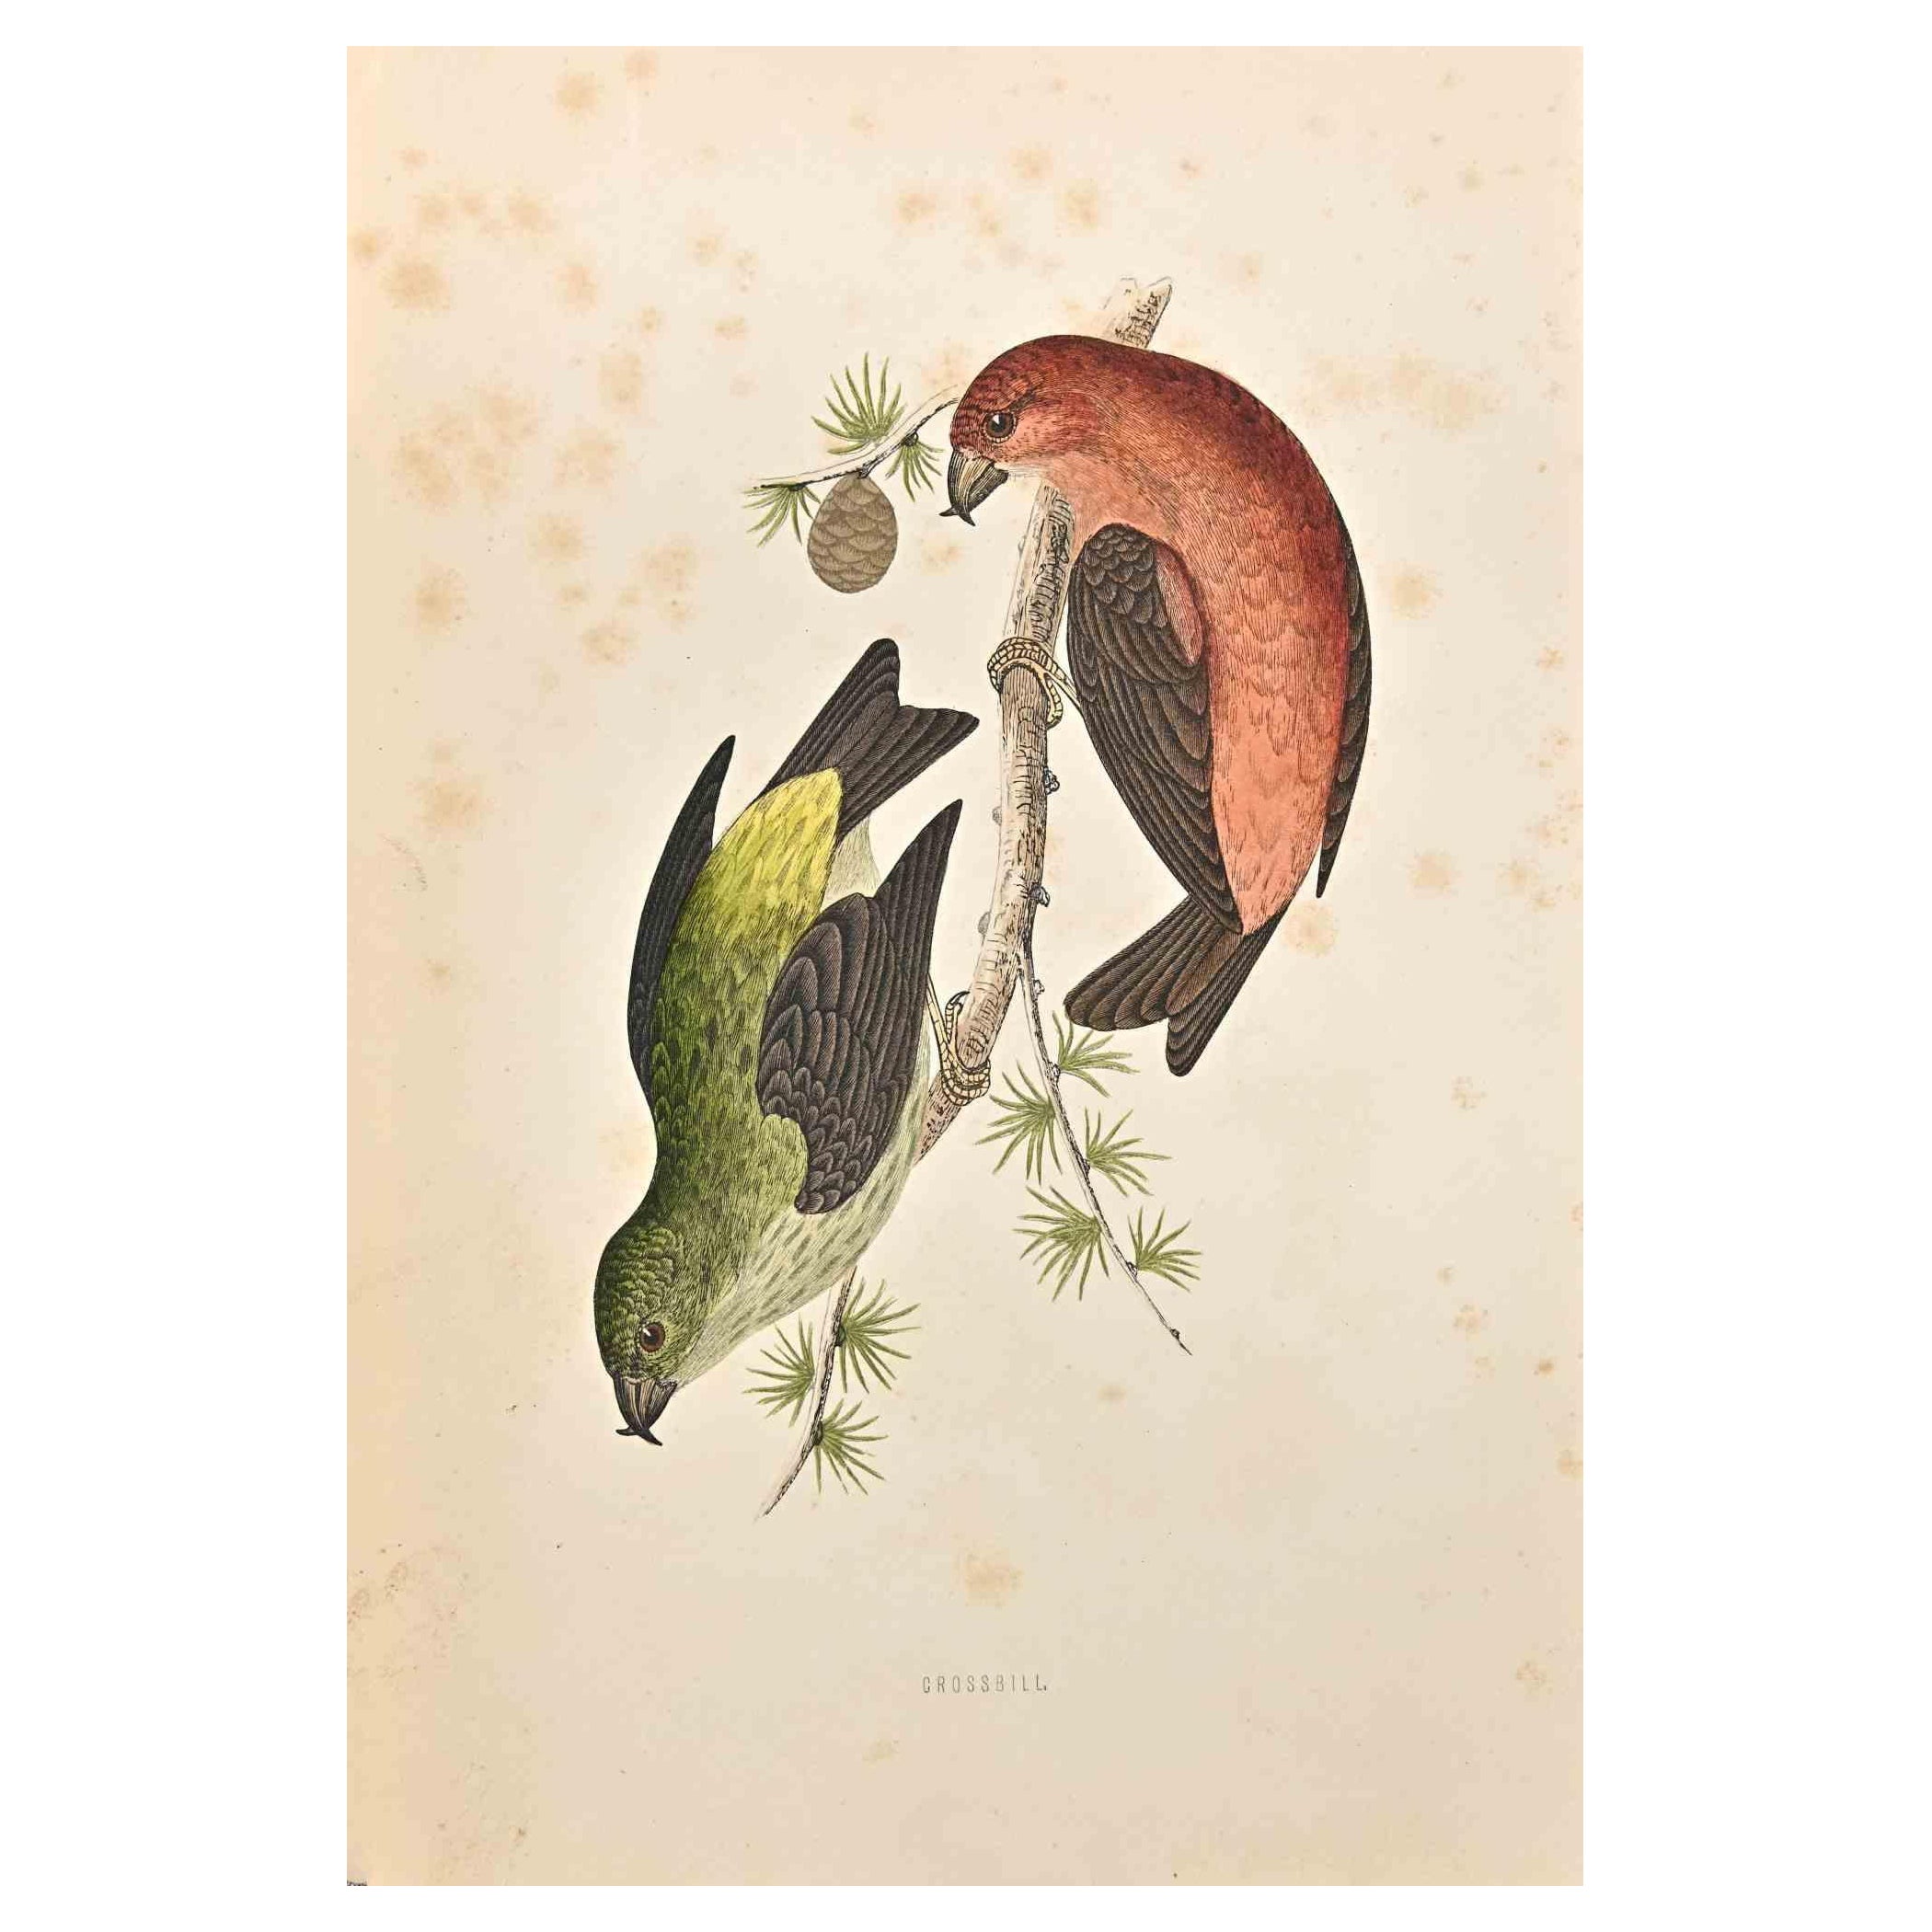 Grossbill  is a modern artwork realized in 1870 by the British artist Alexander Francis Lydon (1836-1917) . 

Woodcut print, hand colored, published by London, Bell & Sons, 1870.  Name of the bird printed in plate. This work is part of a print suite